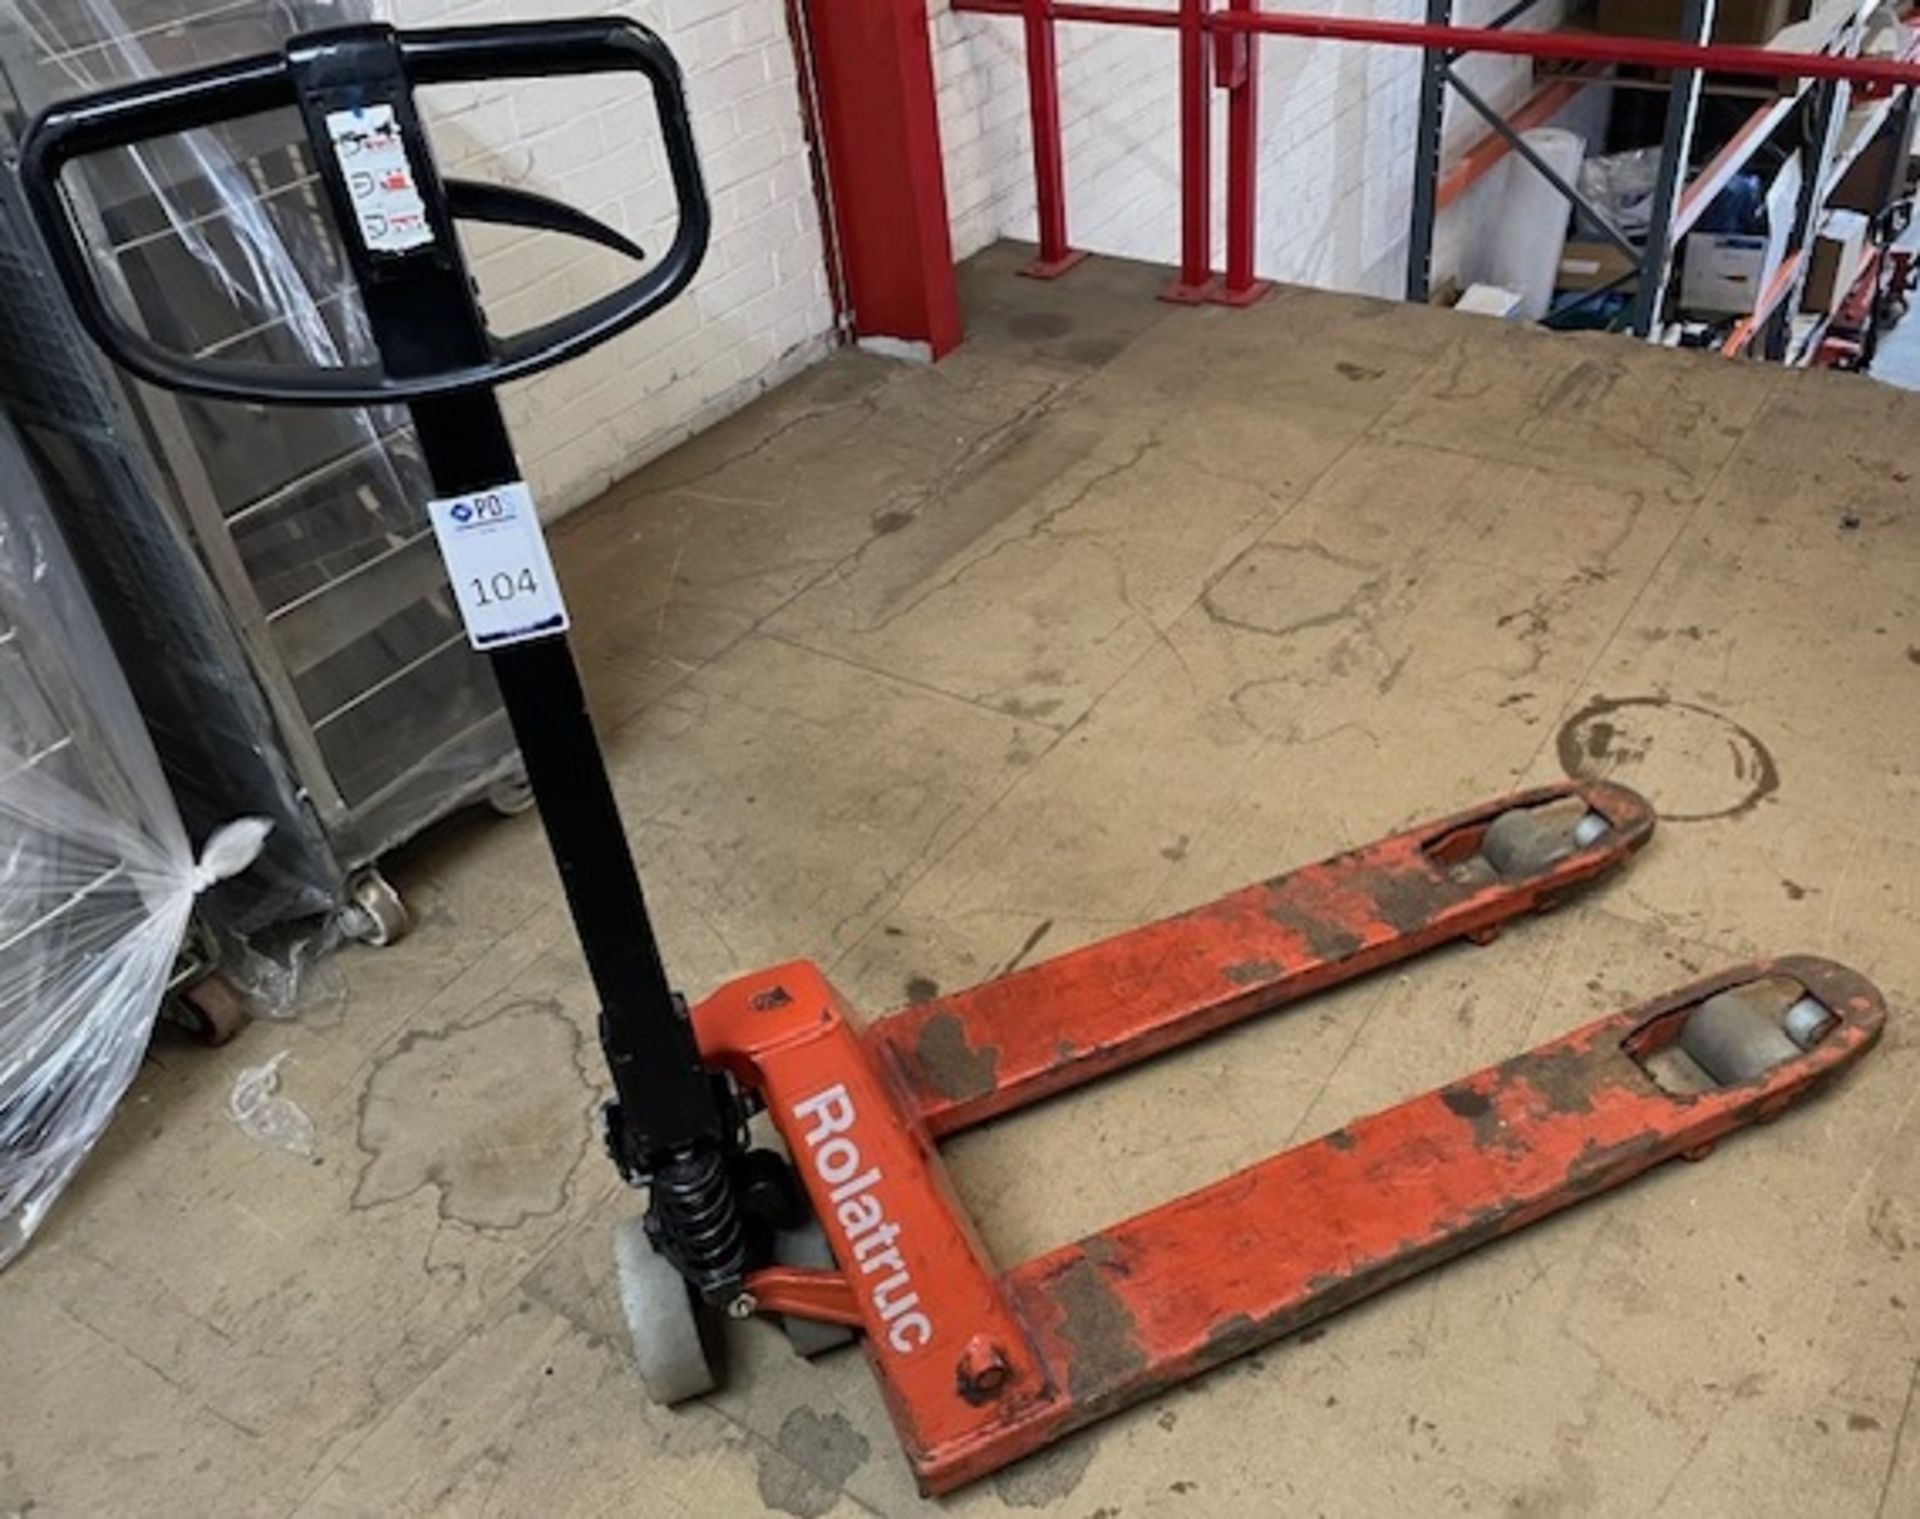 BT Rolatruc Hydraulic Pallet Truck (Collection Delayed Until Friday 12th April - AM) (Location: NW